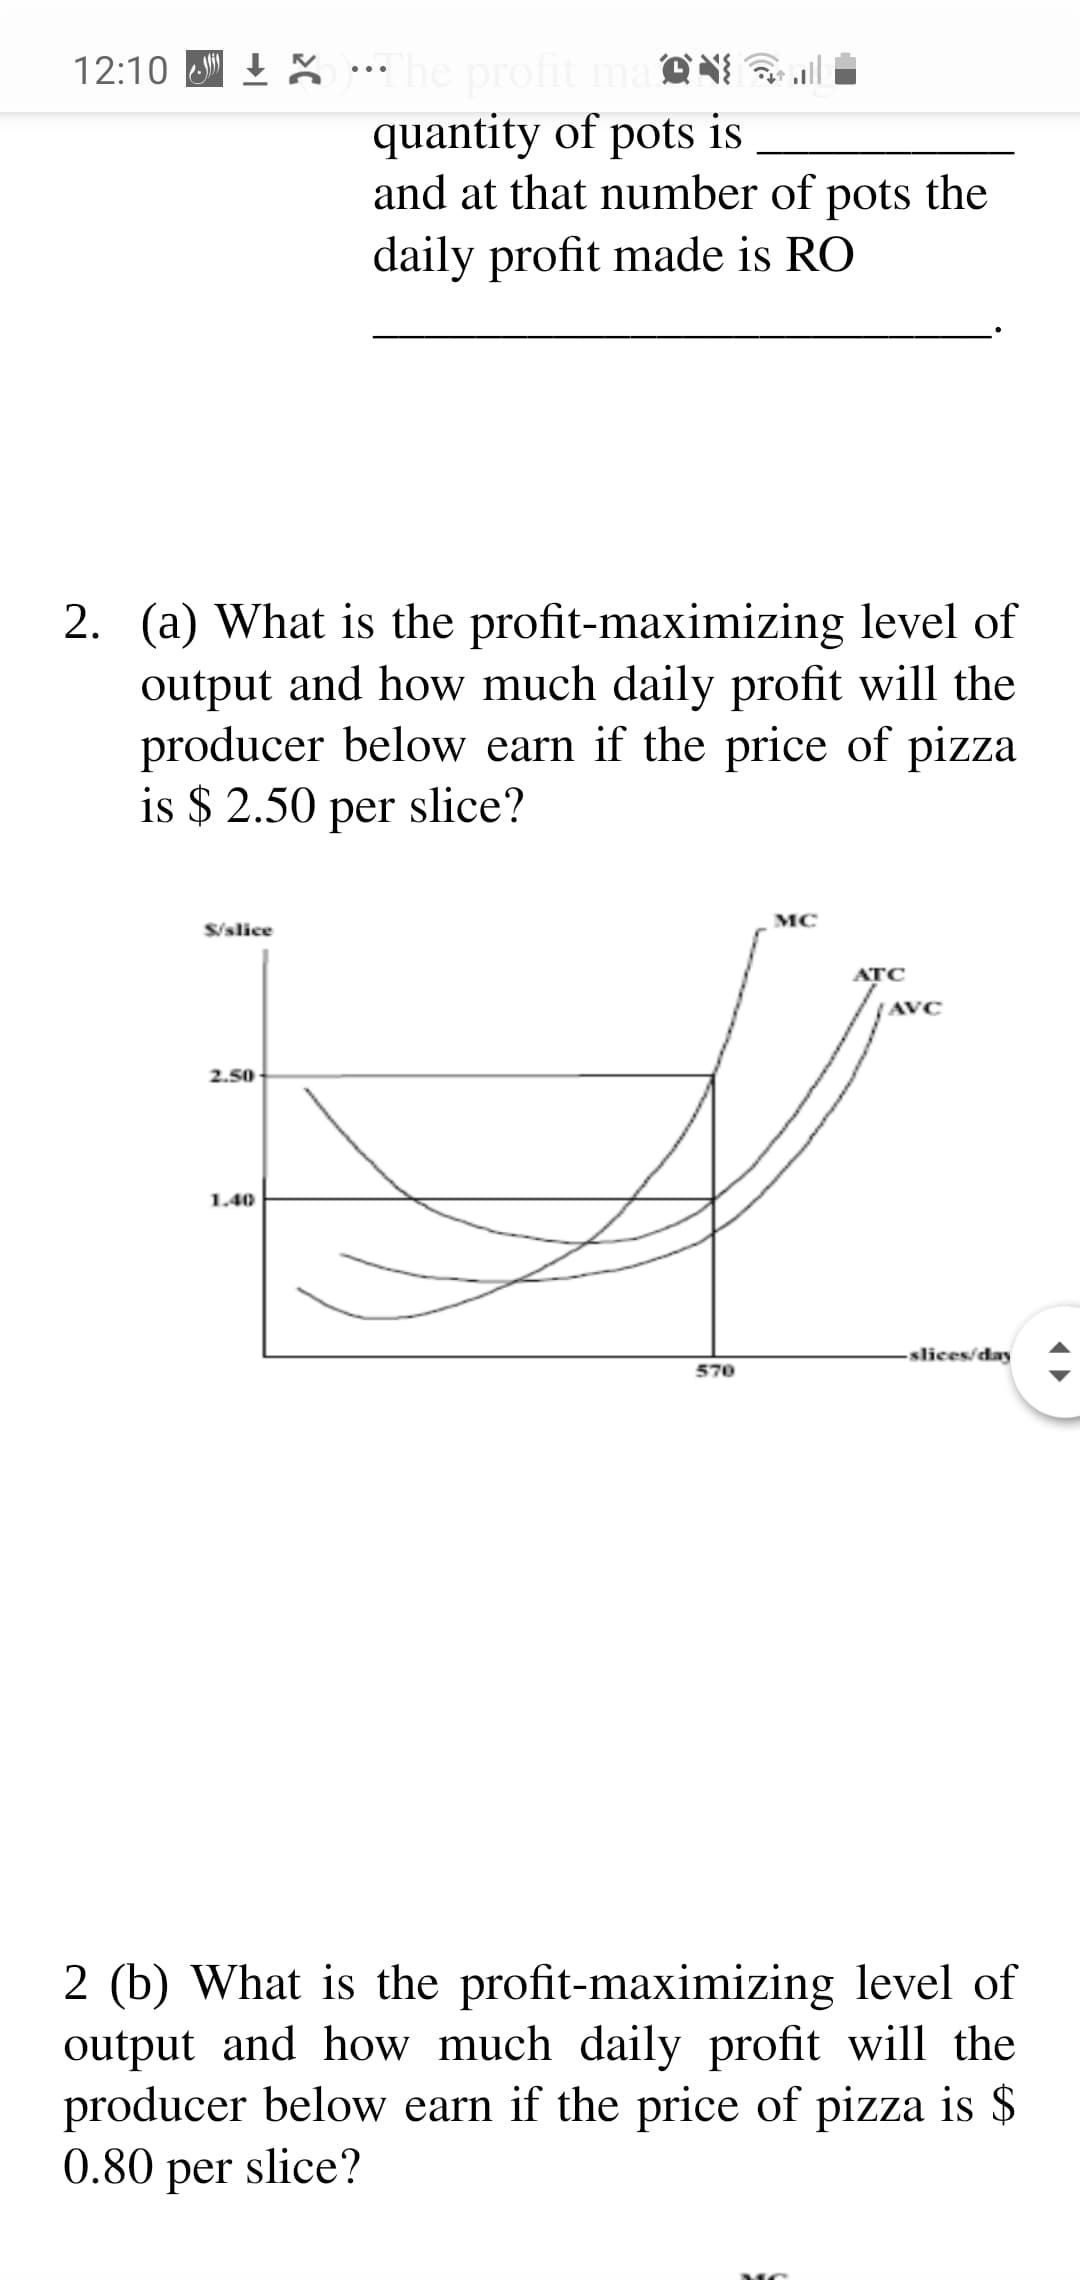 (a) What is the profit-maximizing level of
output and how much daily profit will the
producer below earn if the price of pizza
is $ 2.50 per slice?
MC
S/slice
ATC
AVC
2.50
1.40
slices/day
570
